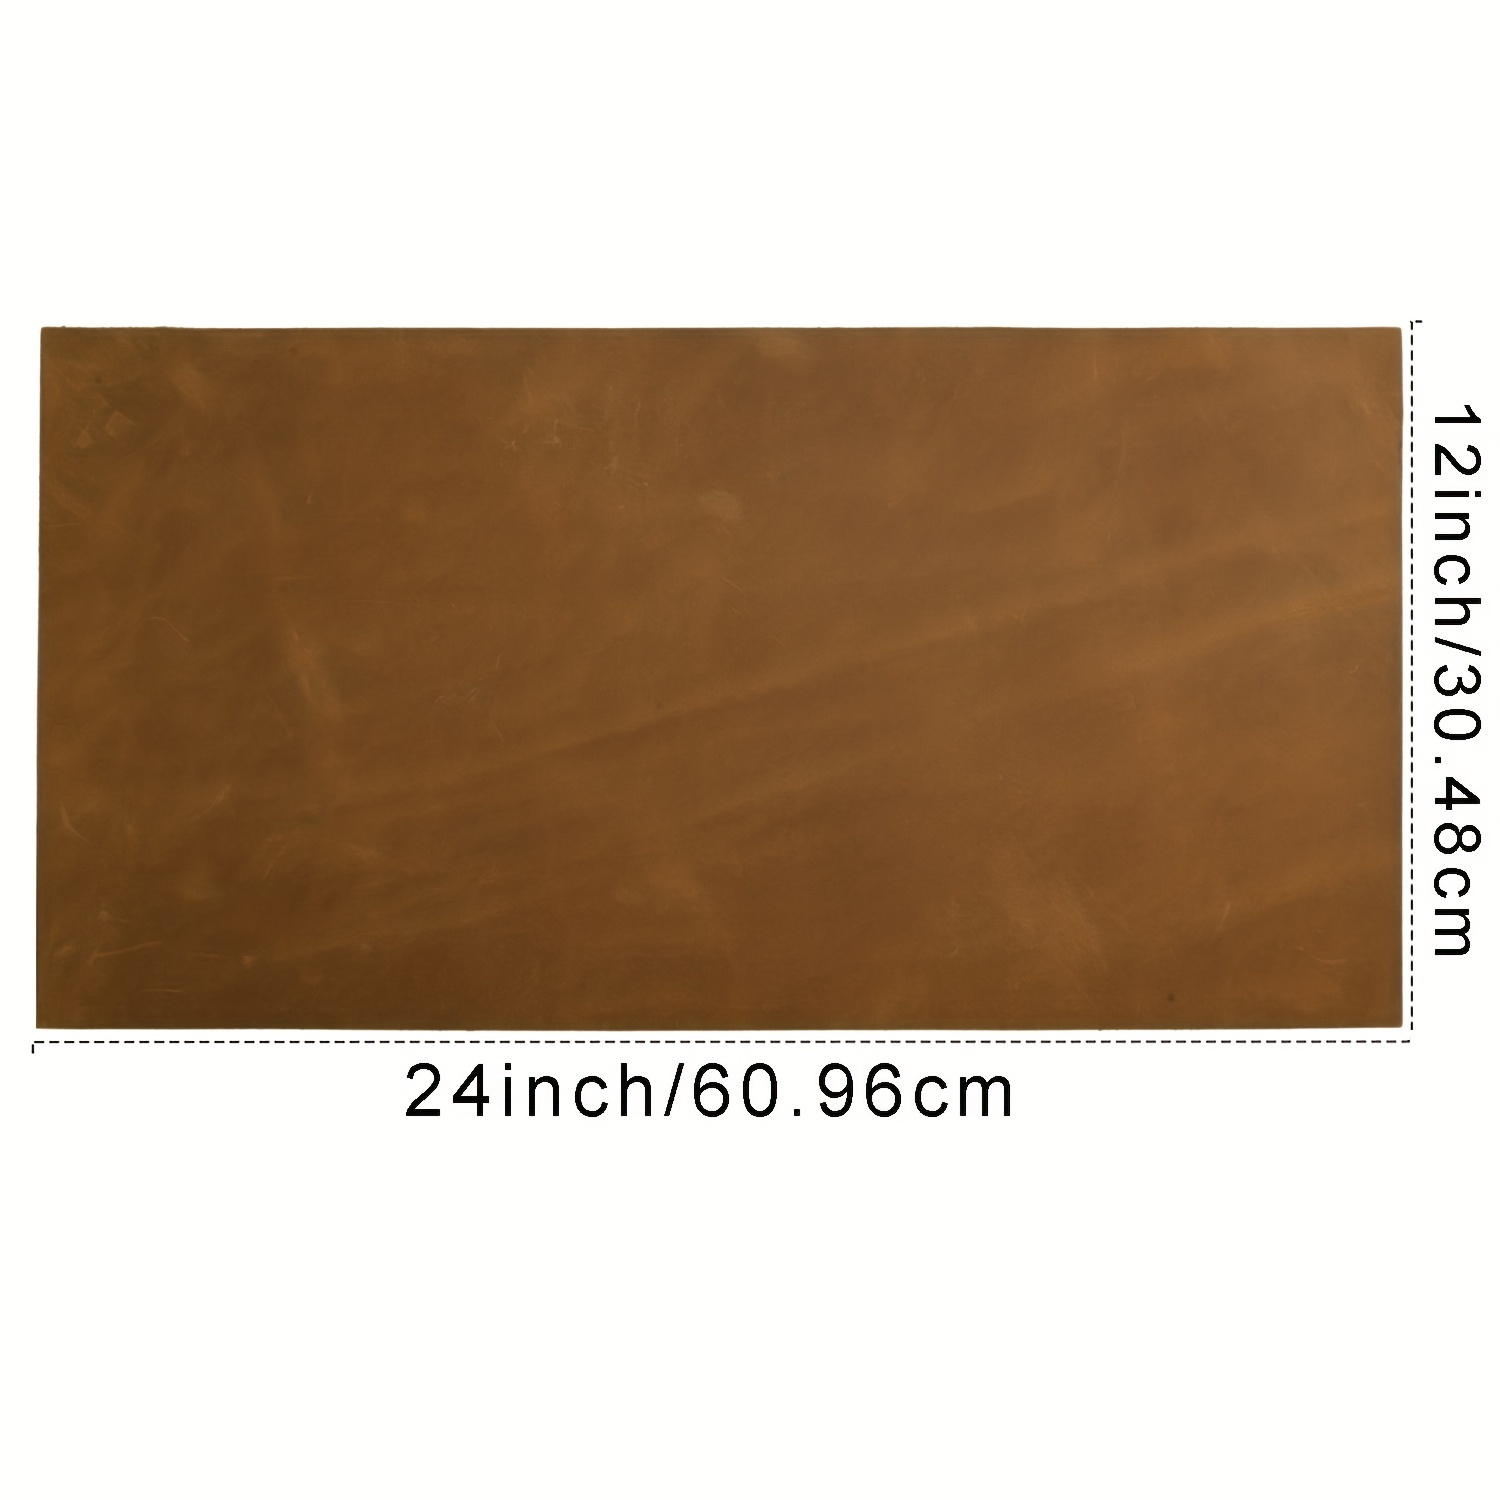 Tooling Leather Square 1.8-2.0MM Thick Genuine Top Full Grain Oil Tan Crazy  Horse Cowhide Leather Sheets for Crafts Tooling Sewing Wallet Earring Hobby  (Brown, 8x12) Brown 8x12